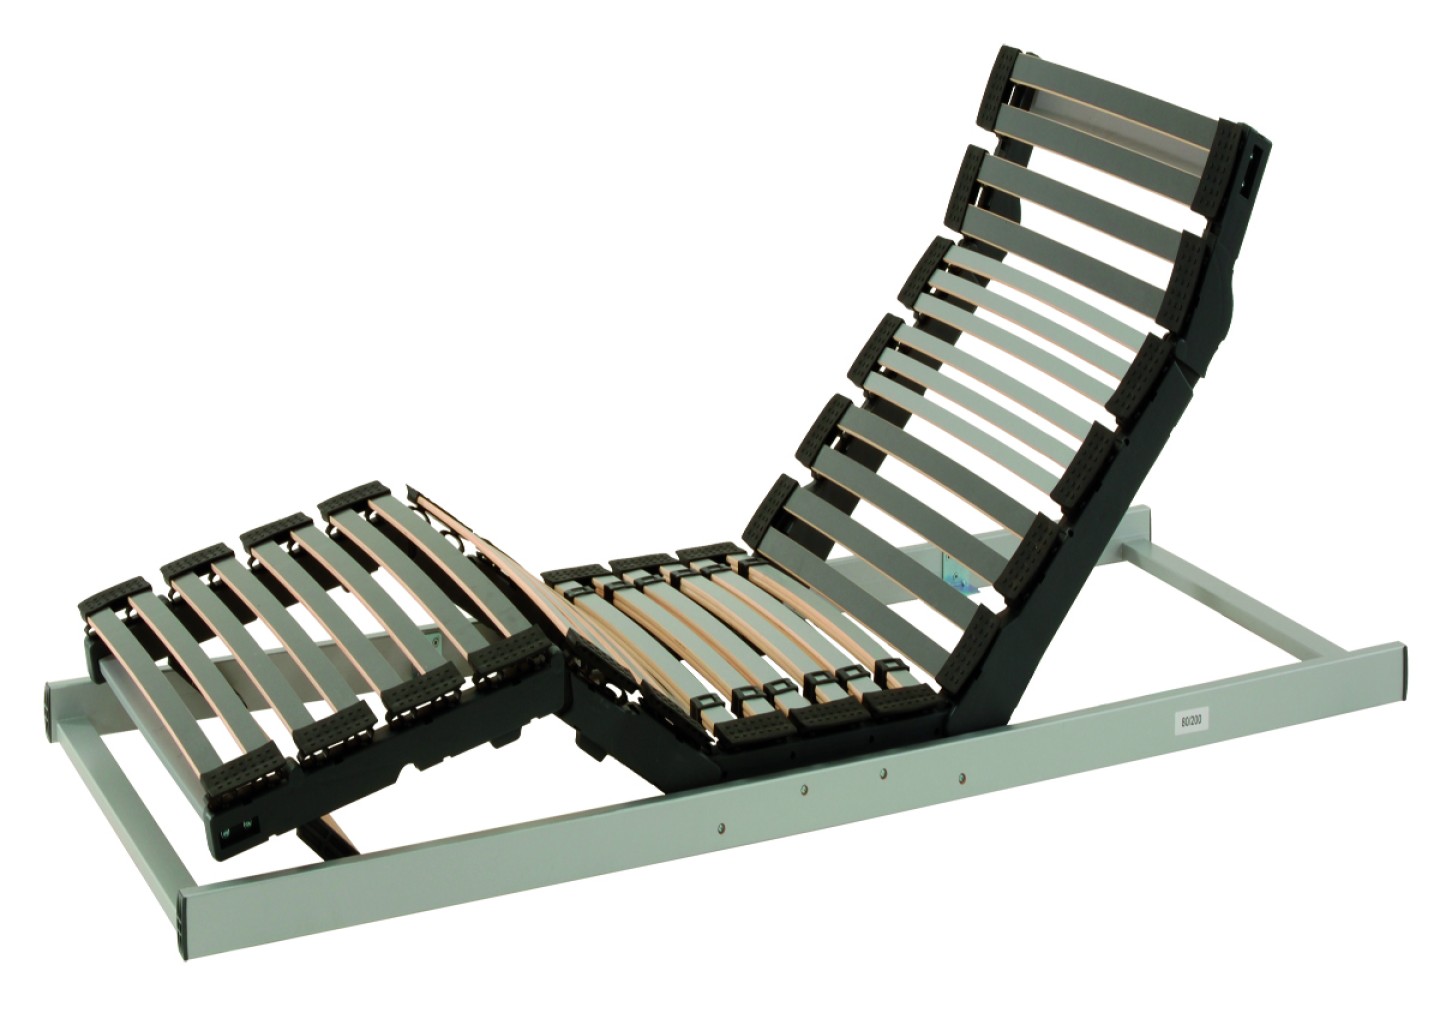 THE FLEXIBLE BED FRAME by Elite Strom